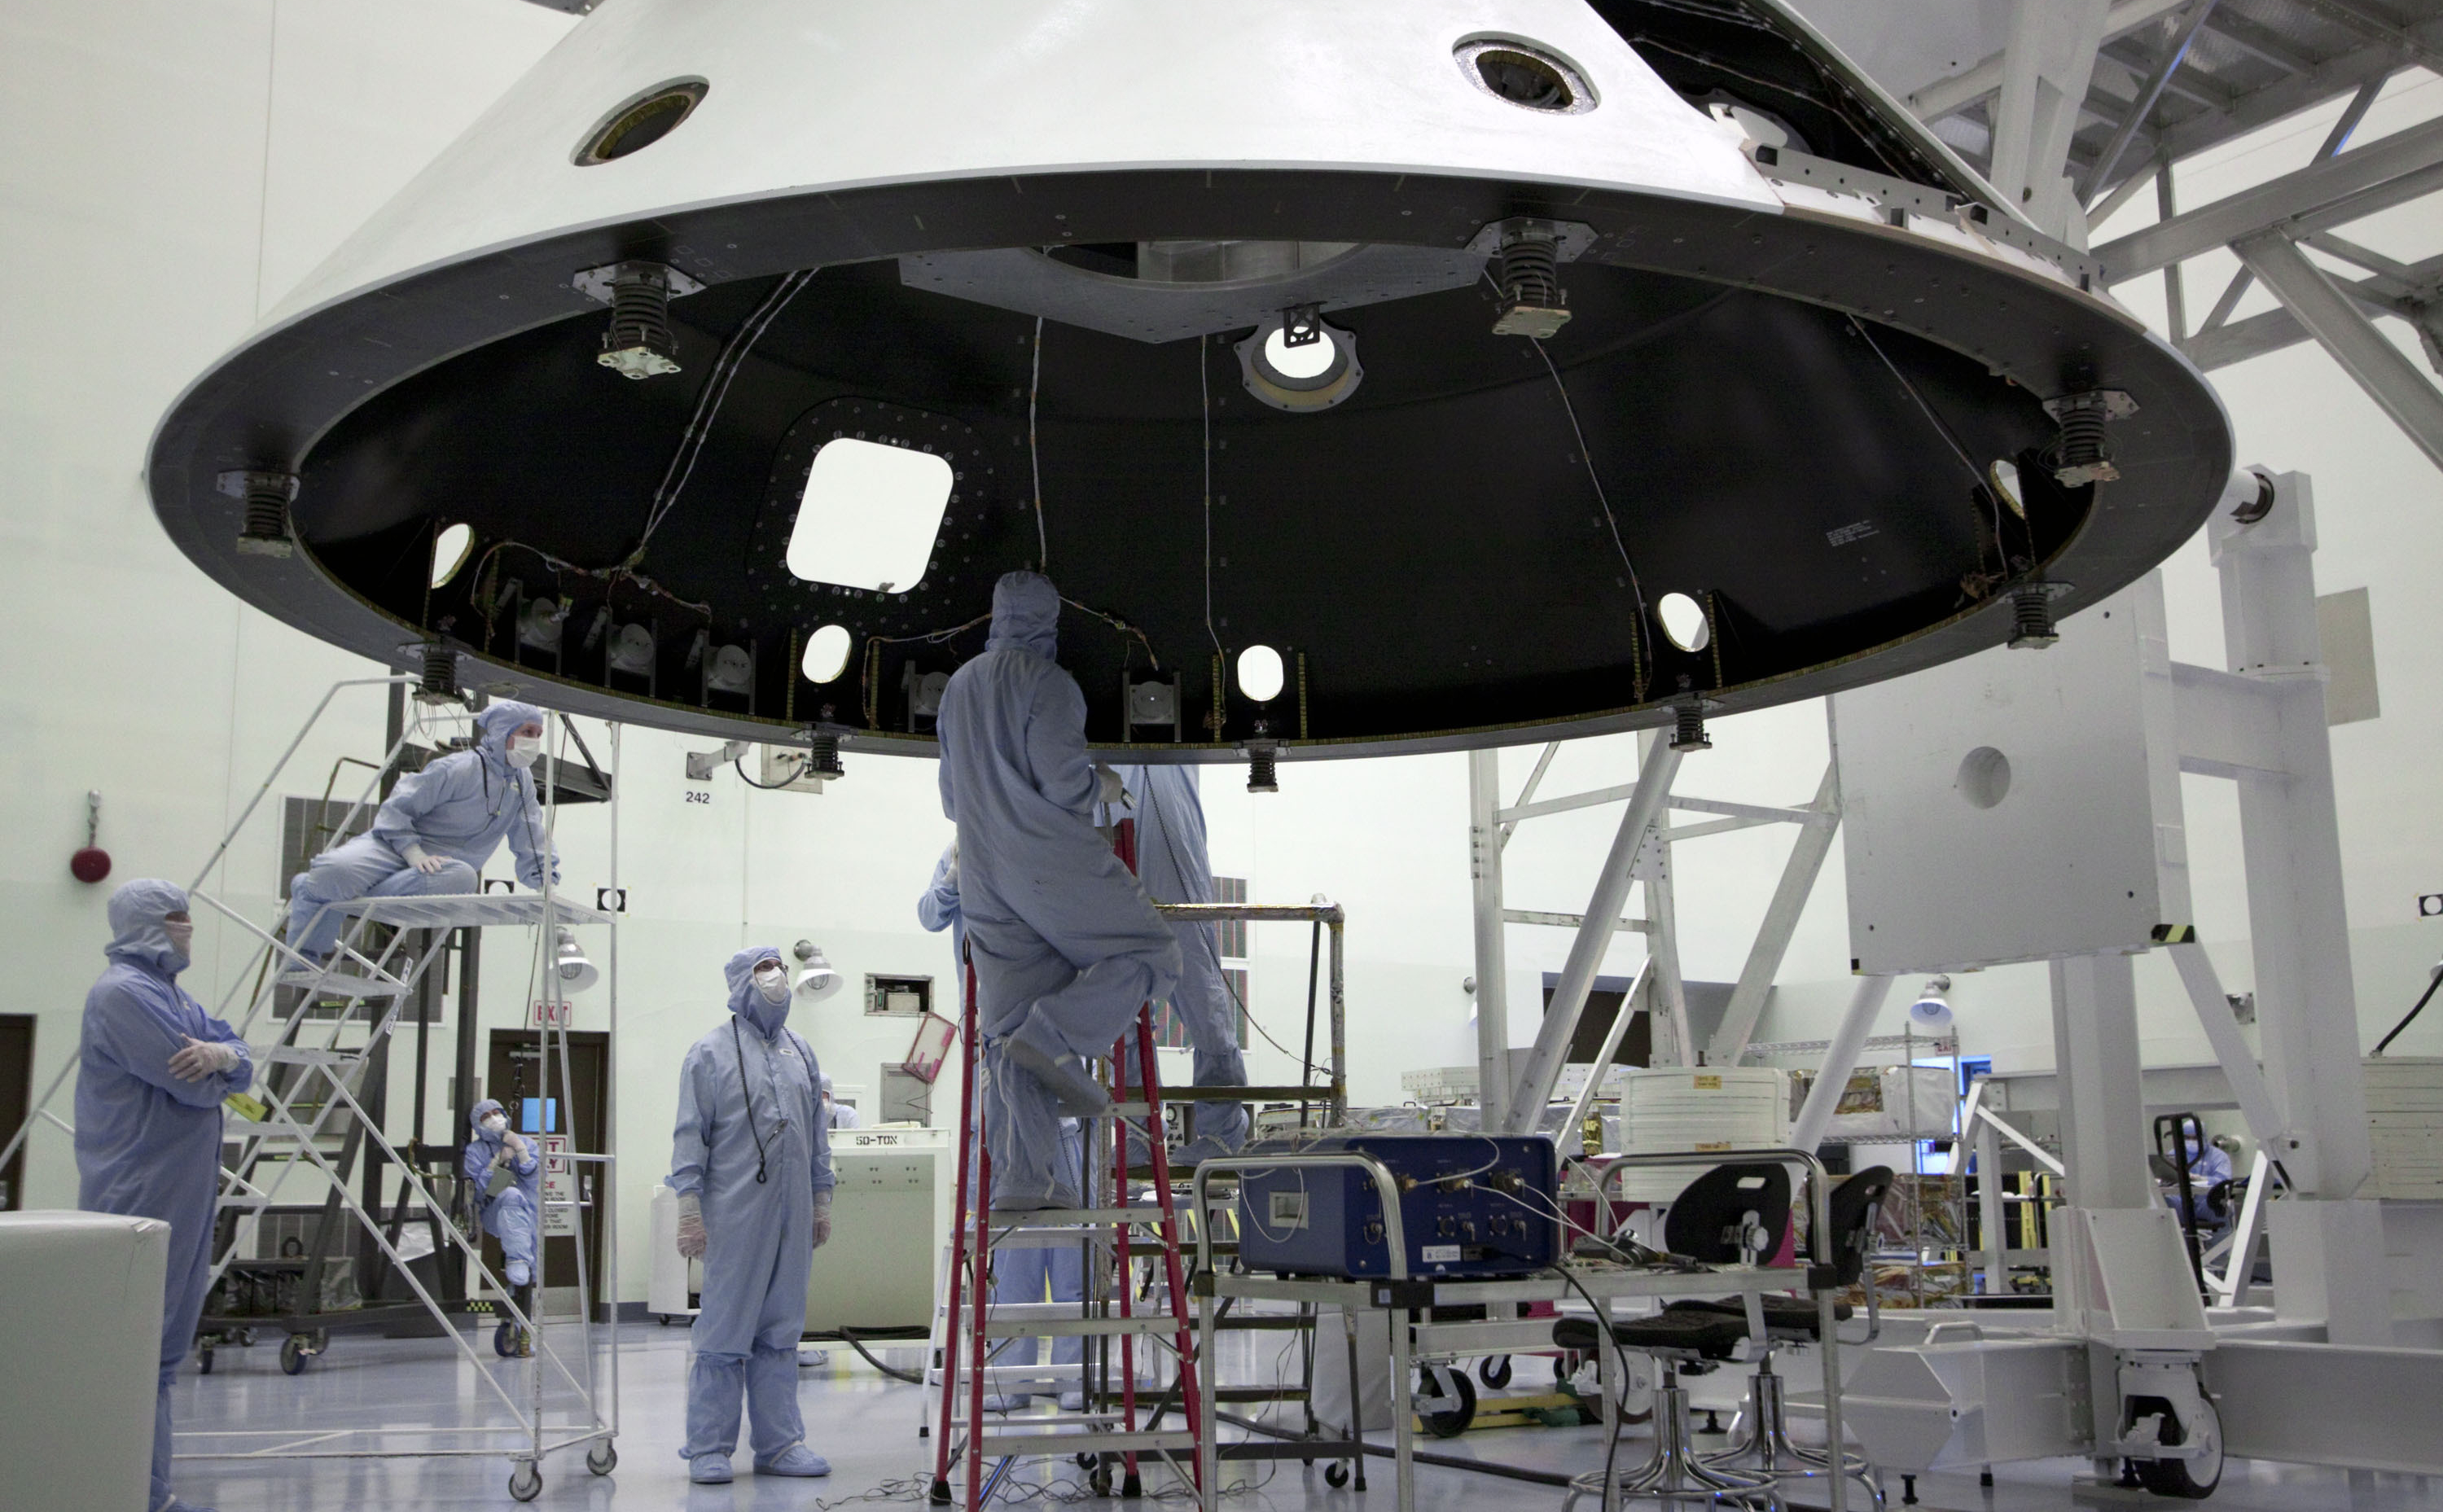 At the Payload Hazardous Servicing Facility at NASA's Kennedy Space Center in Florida, technicians process the backshell for NASA's Mars Science Laboratory (MSL).